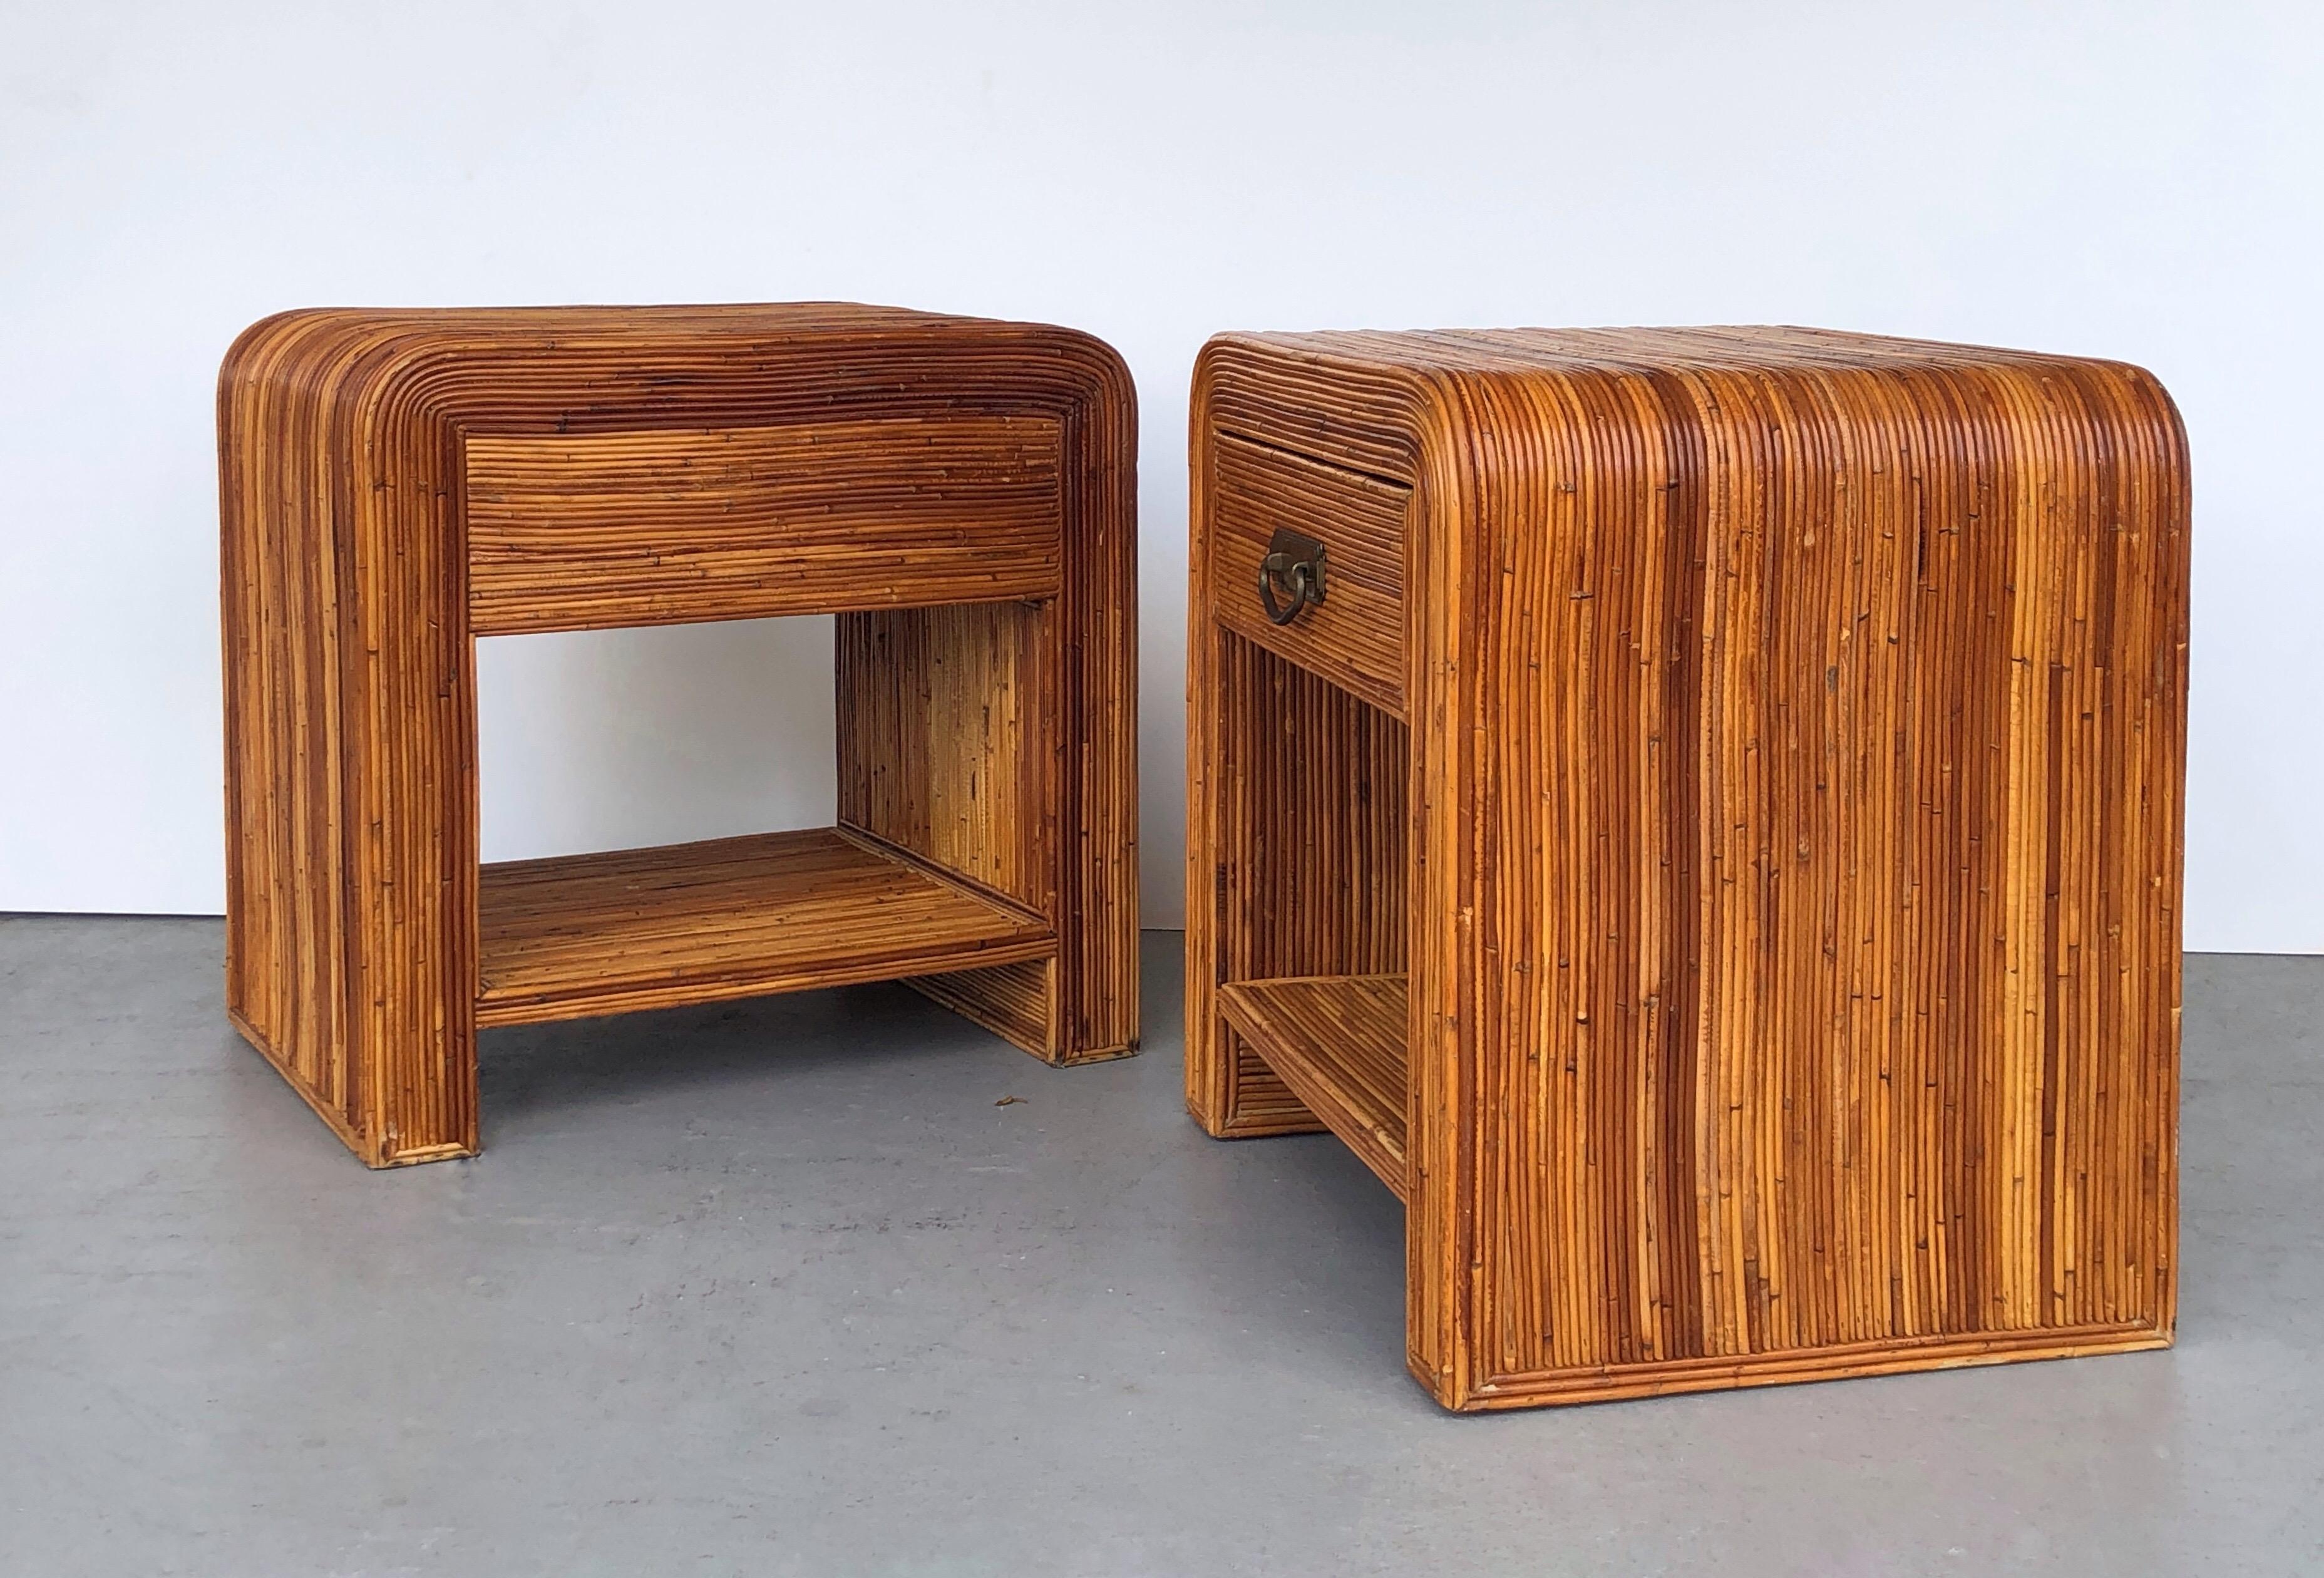 American Rattan Pair of Waterfall Design Bed Side Tables, 1970s